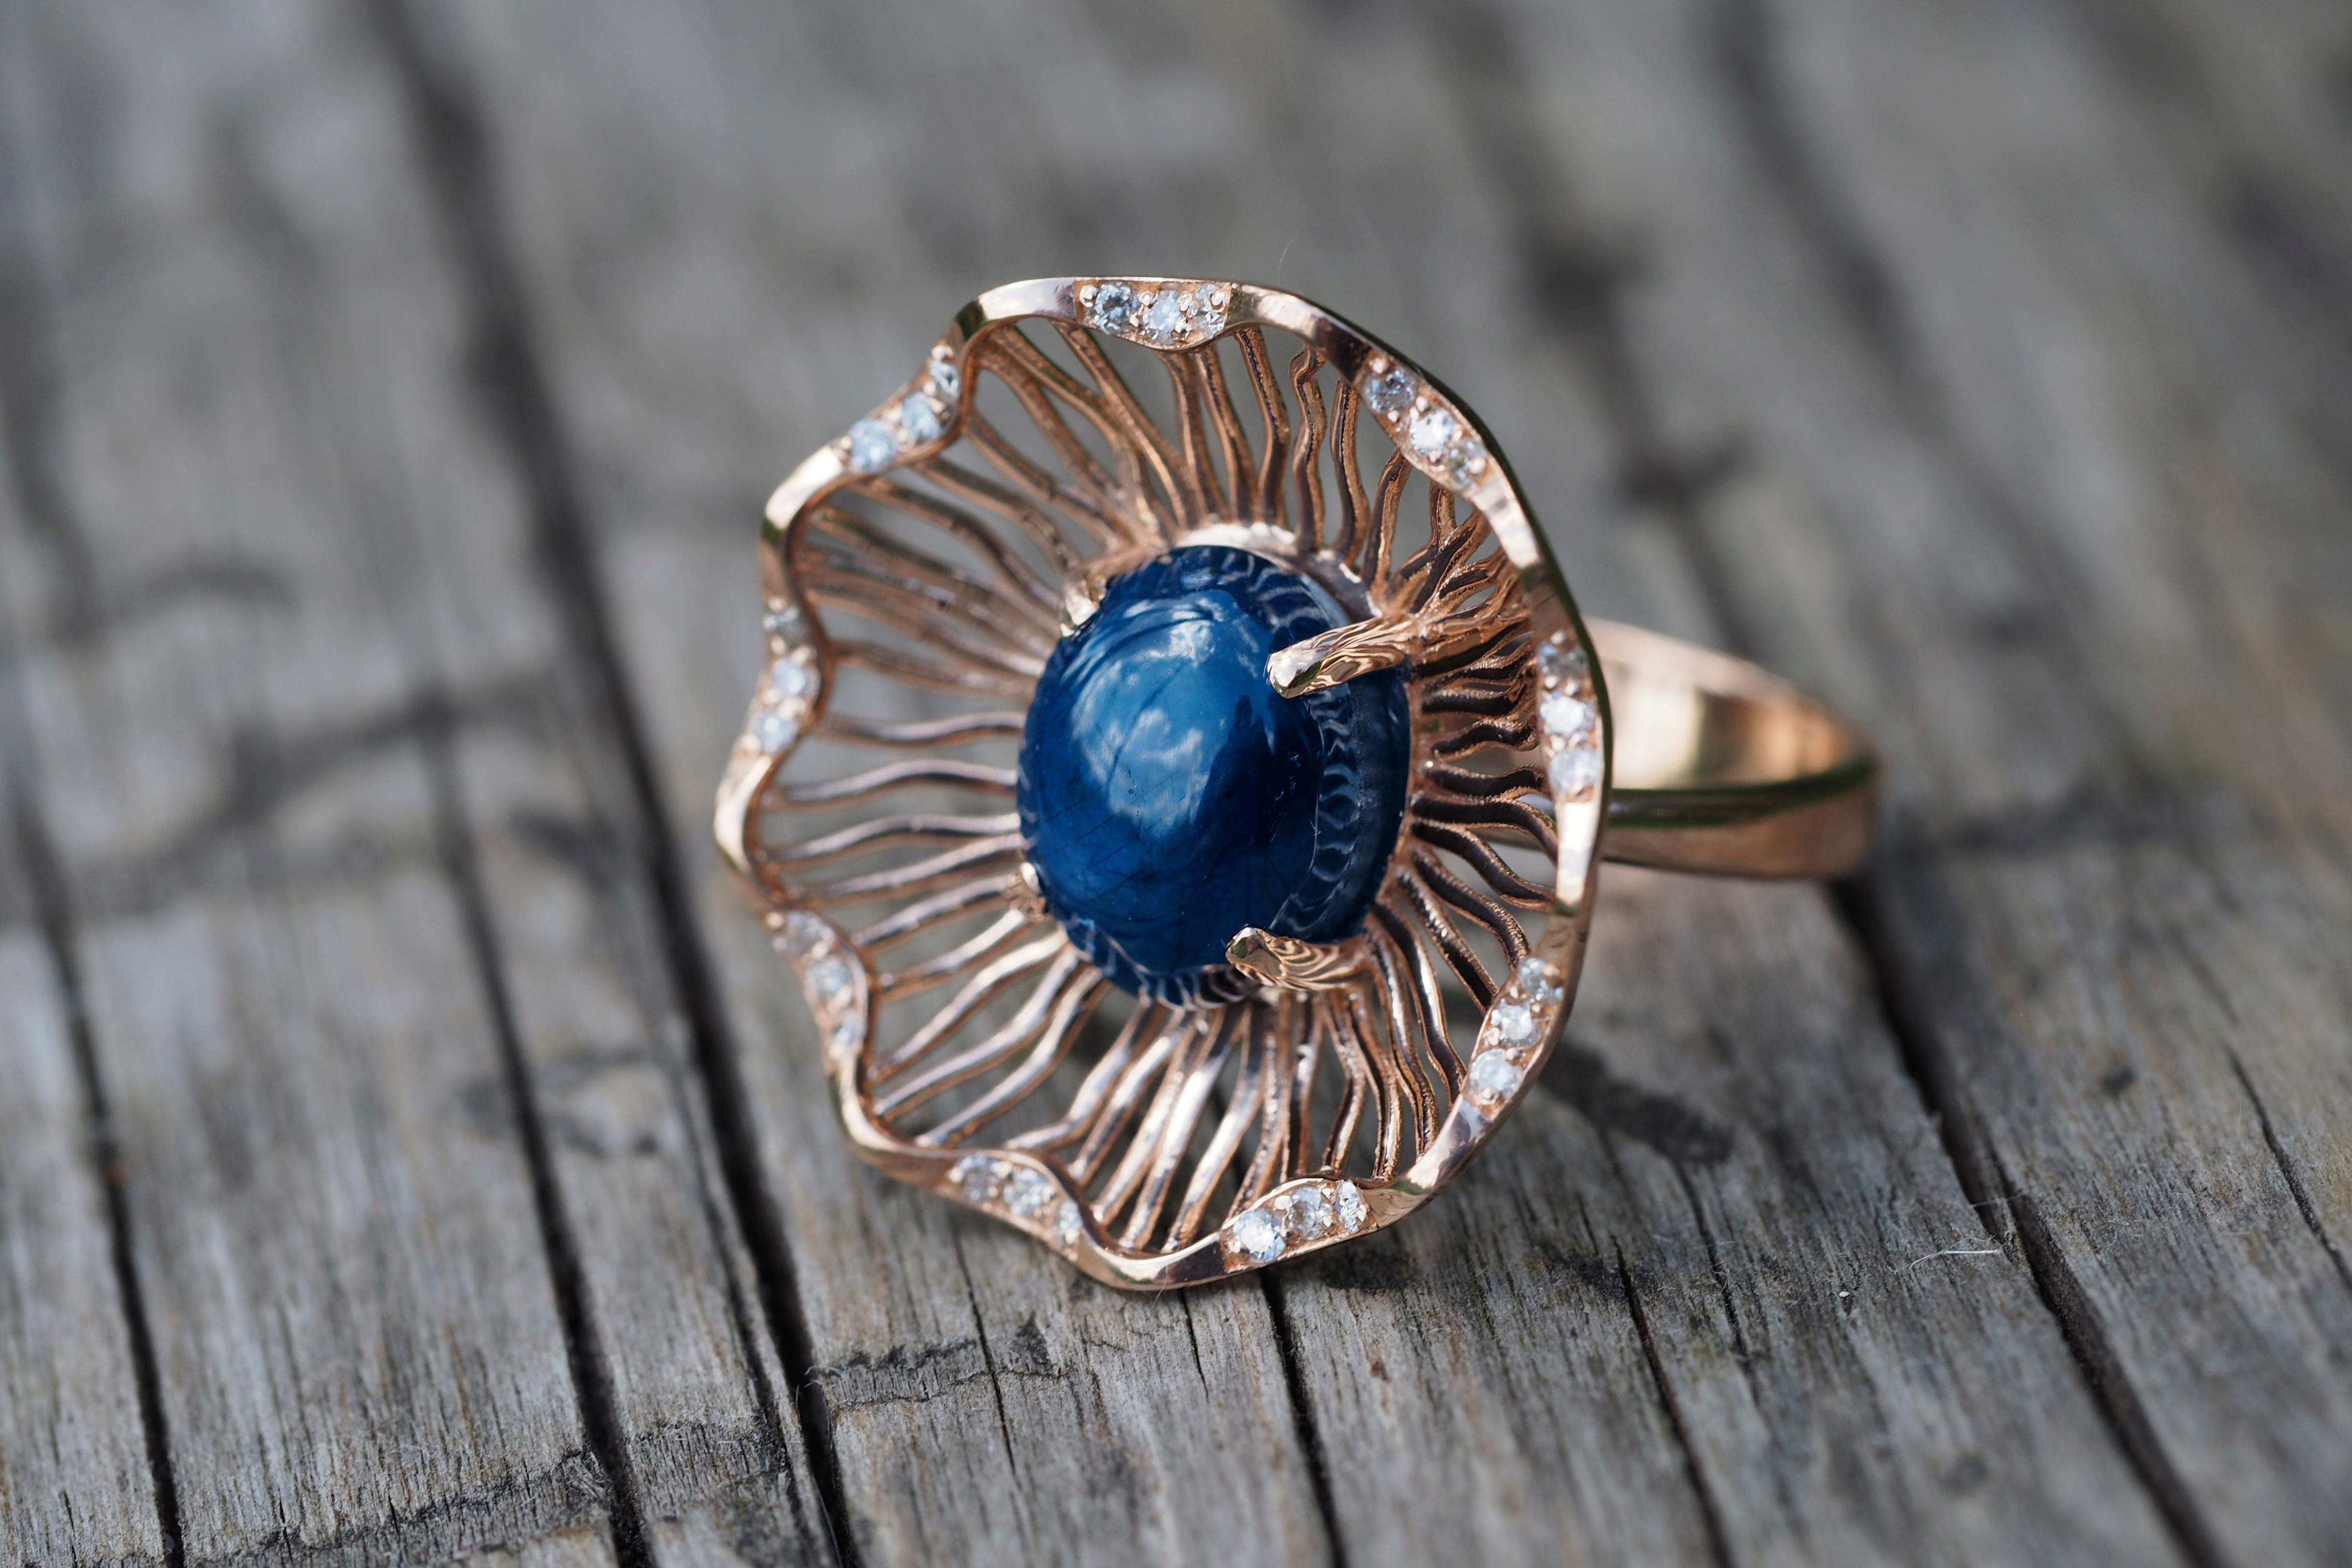 Oval cabochon sapphire 14k gold ring. 
Blue sapphire ring. Sapphire vintage ring. Sapphire flower ring. Sapphire cocktail ring.

Metal: 14k gold
Weight: 4.45 gr. depends from size.

Gemstones (all are tested by proffesional gemmologist):
Sapphire: